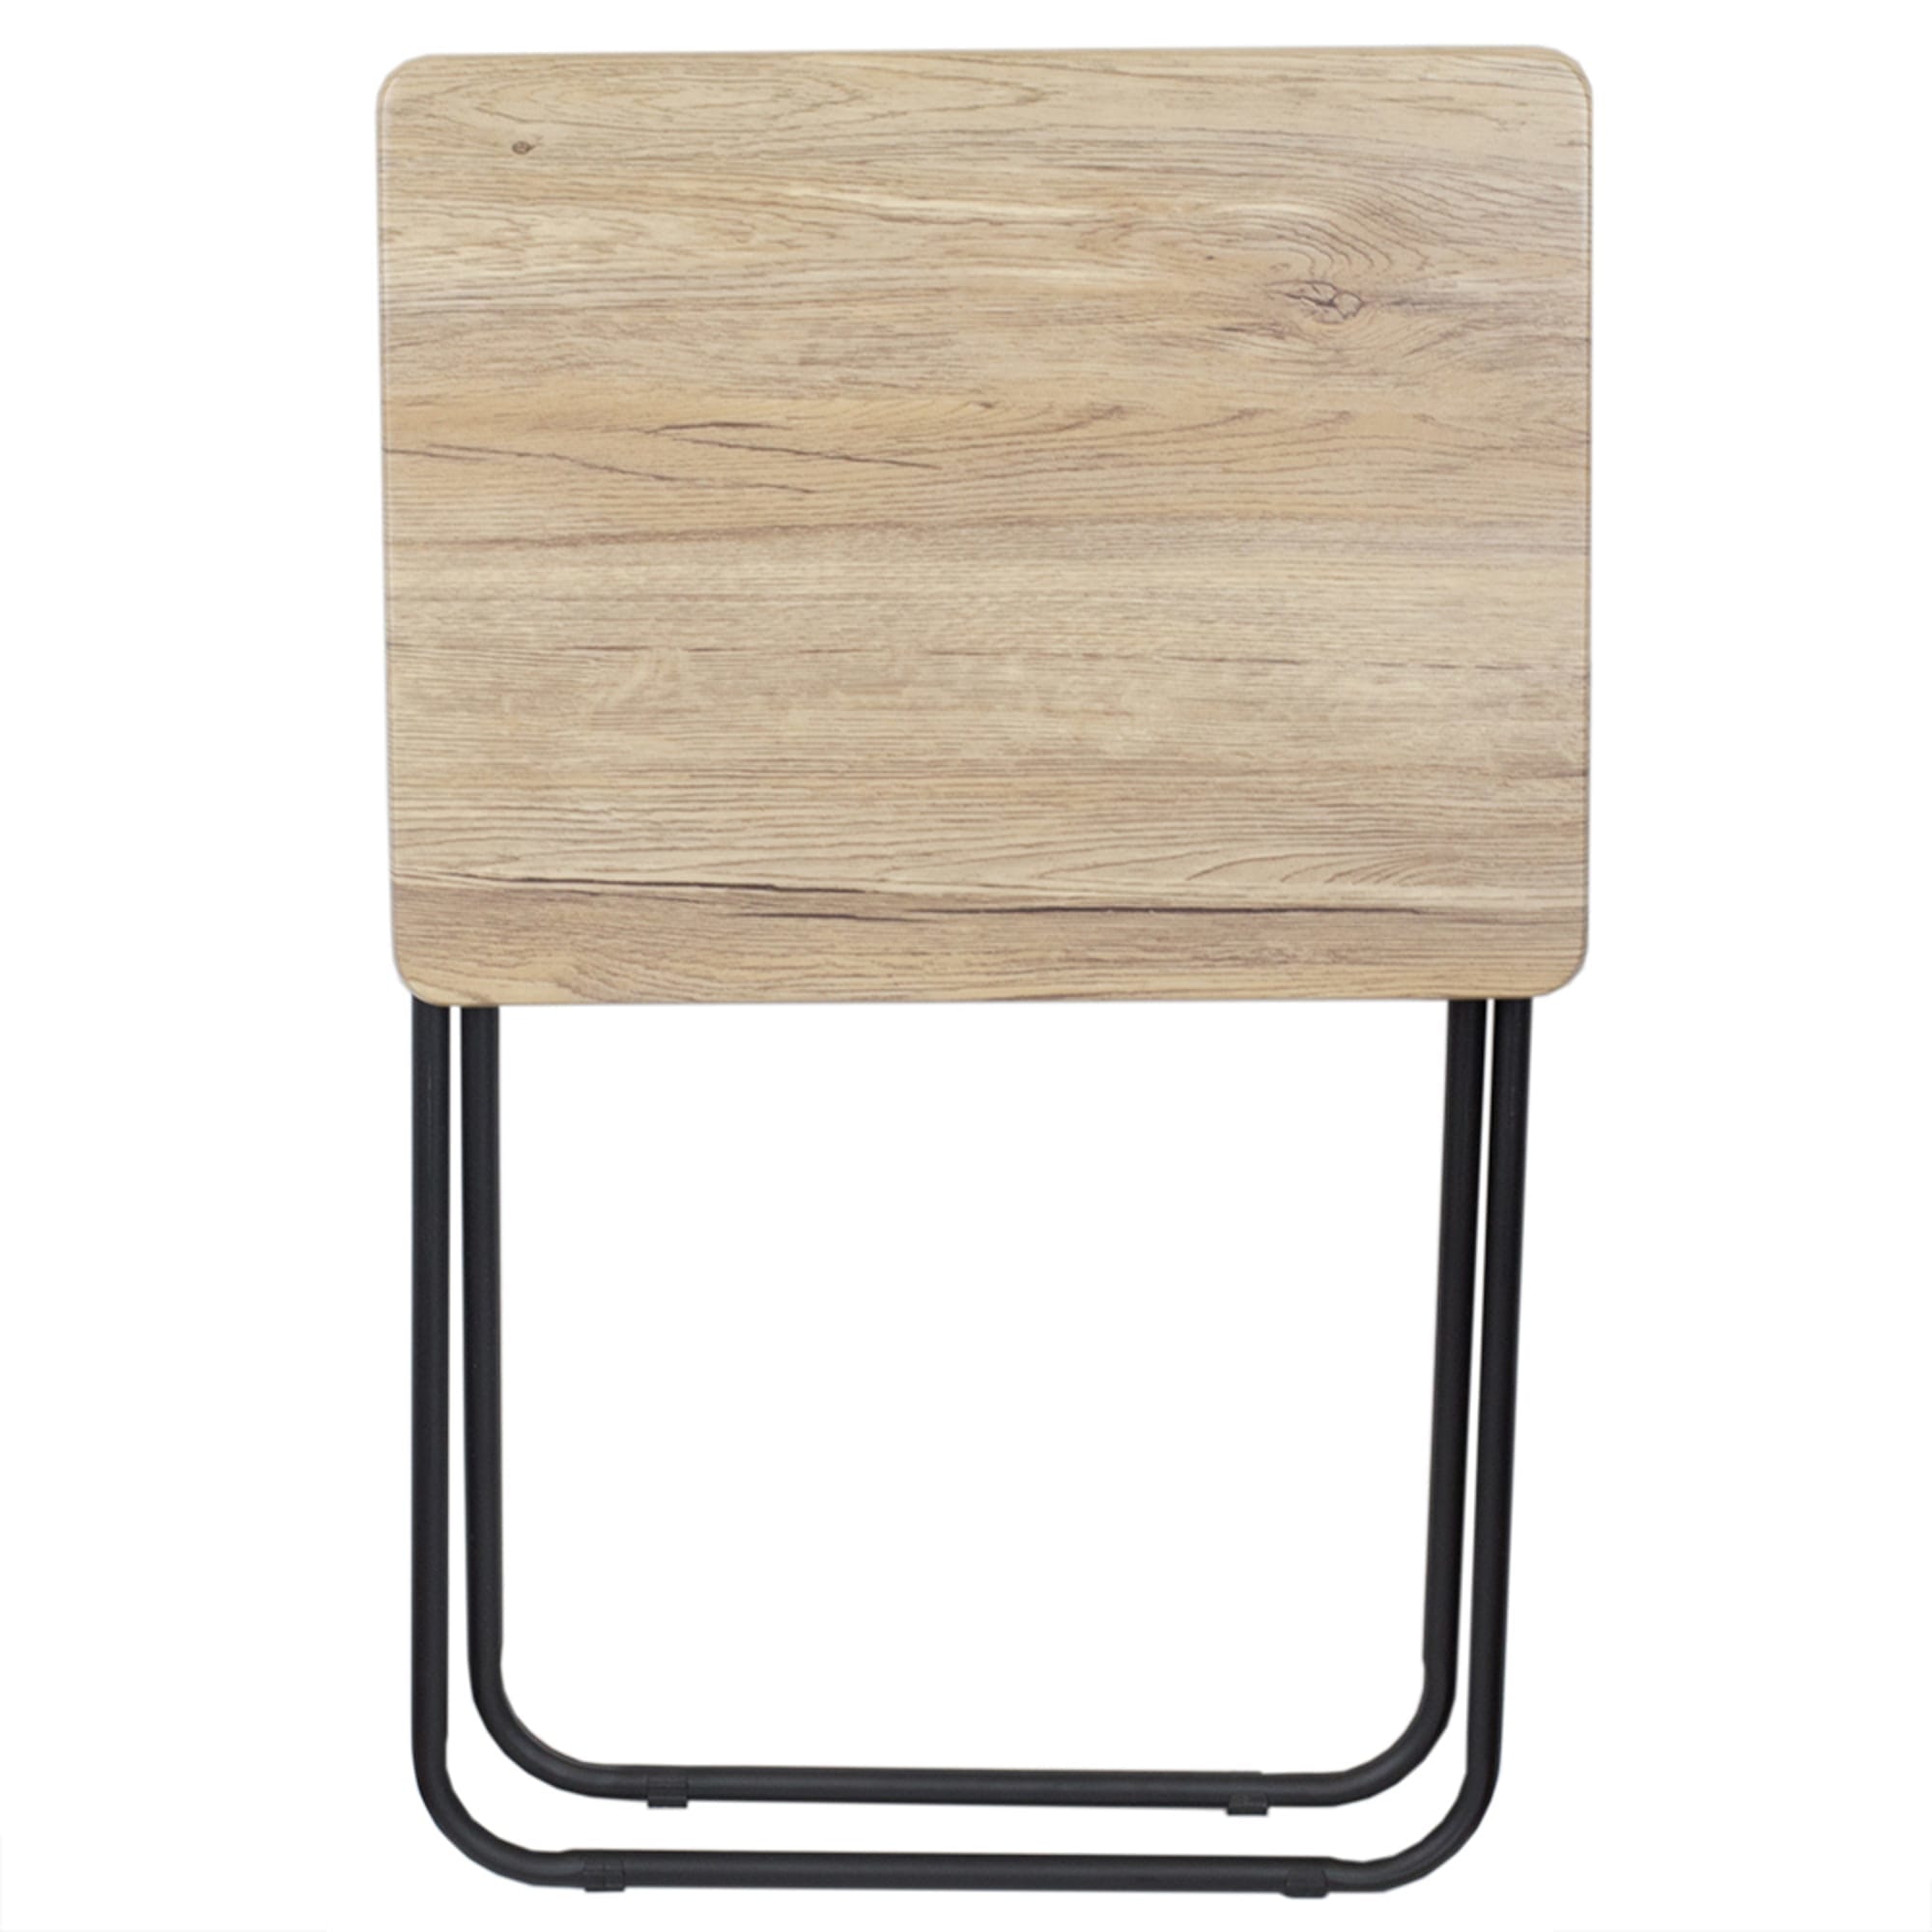 Home Basics Multi-Purpose Foldable Table, Natural $15.00 EACH, CASE PACK OF 6